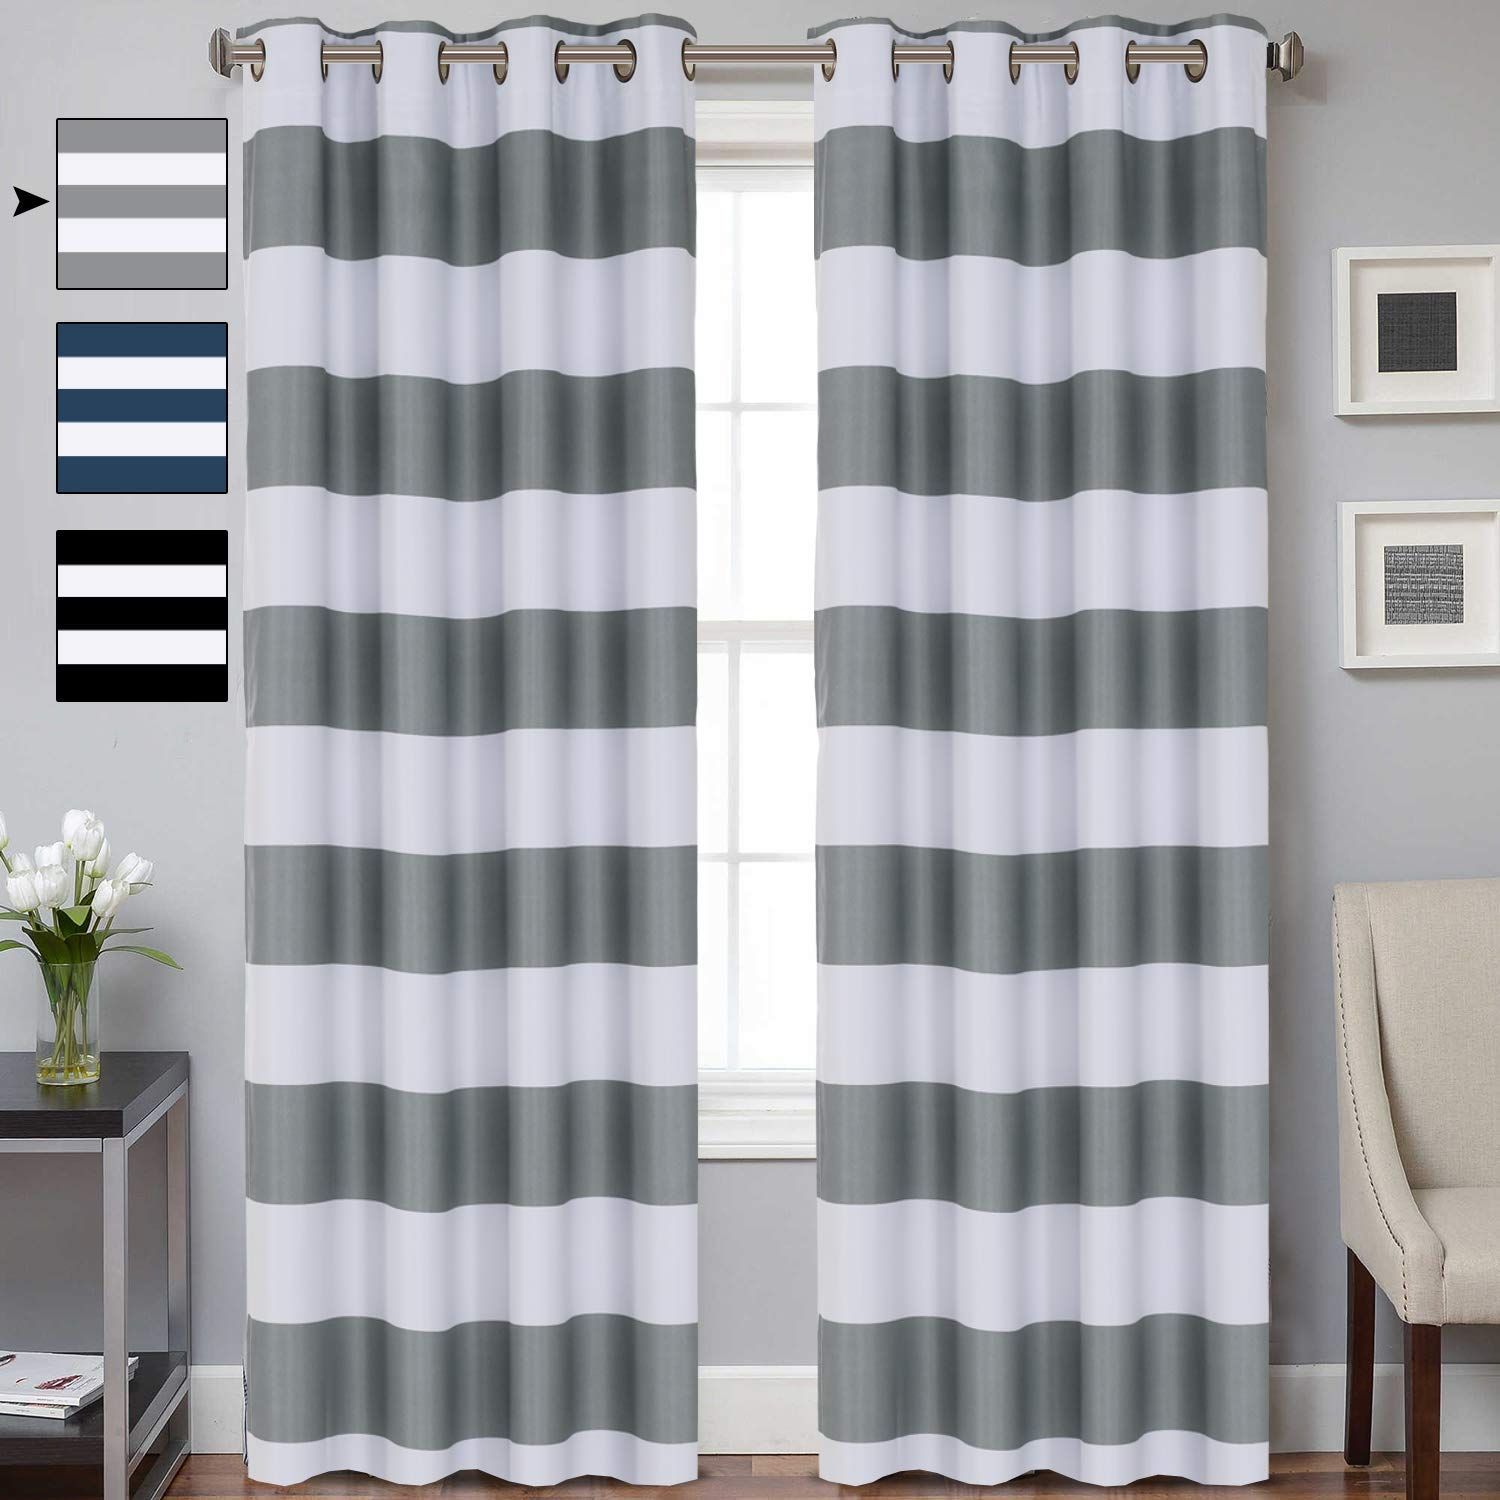 Cheap Striped Velvet Curtains, Find Striped Velvet Curtains Inside Velvet Dream Silver Curtain Panel Pairs (View 31 of 31)